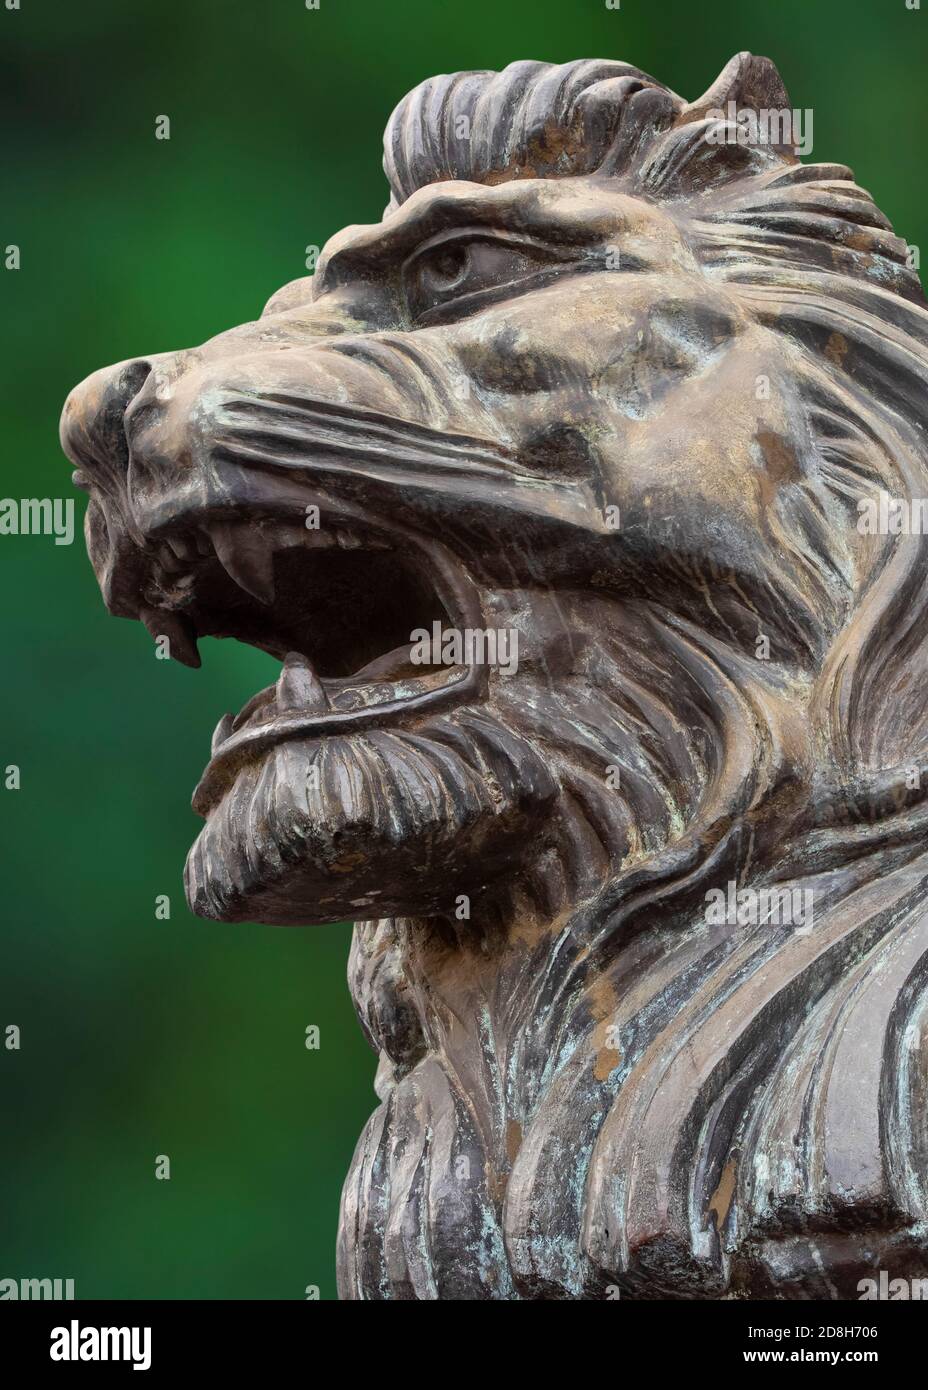 Proud male lion statue in the Asian city of Guilin, China Stock Photo